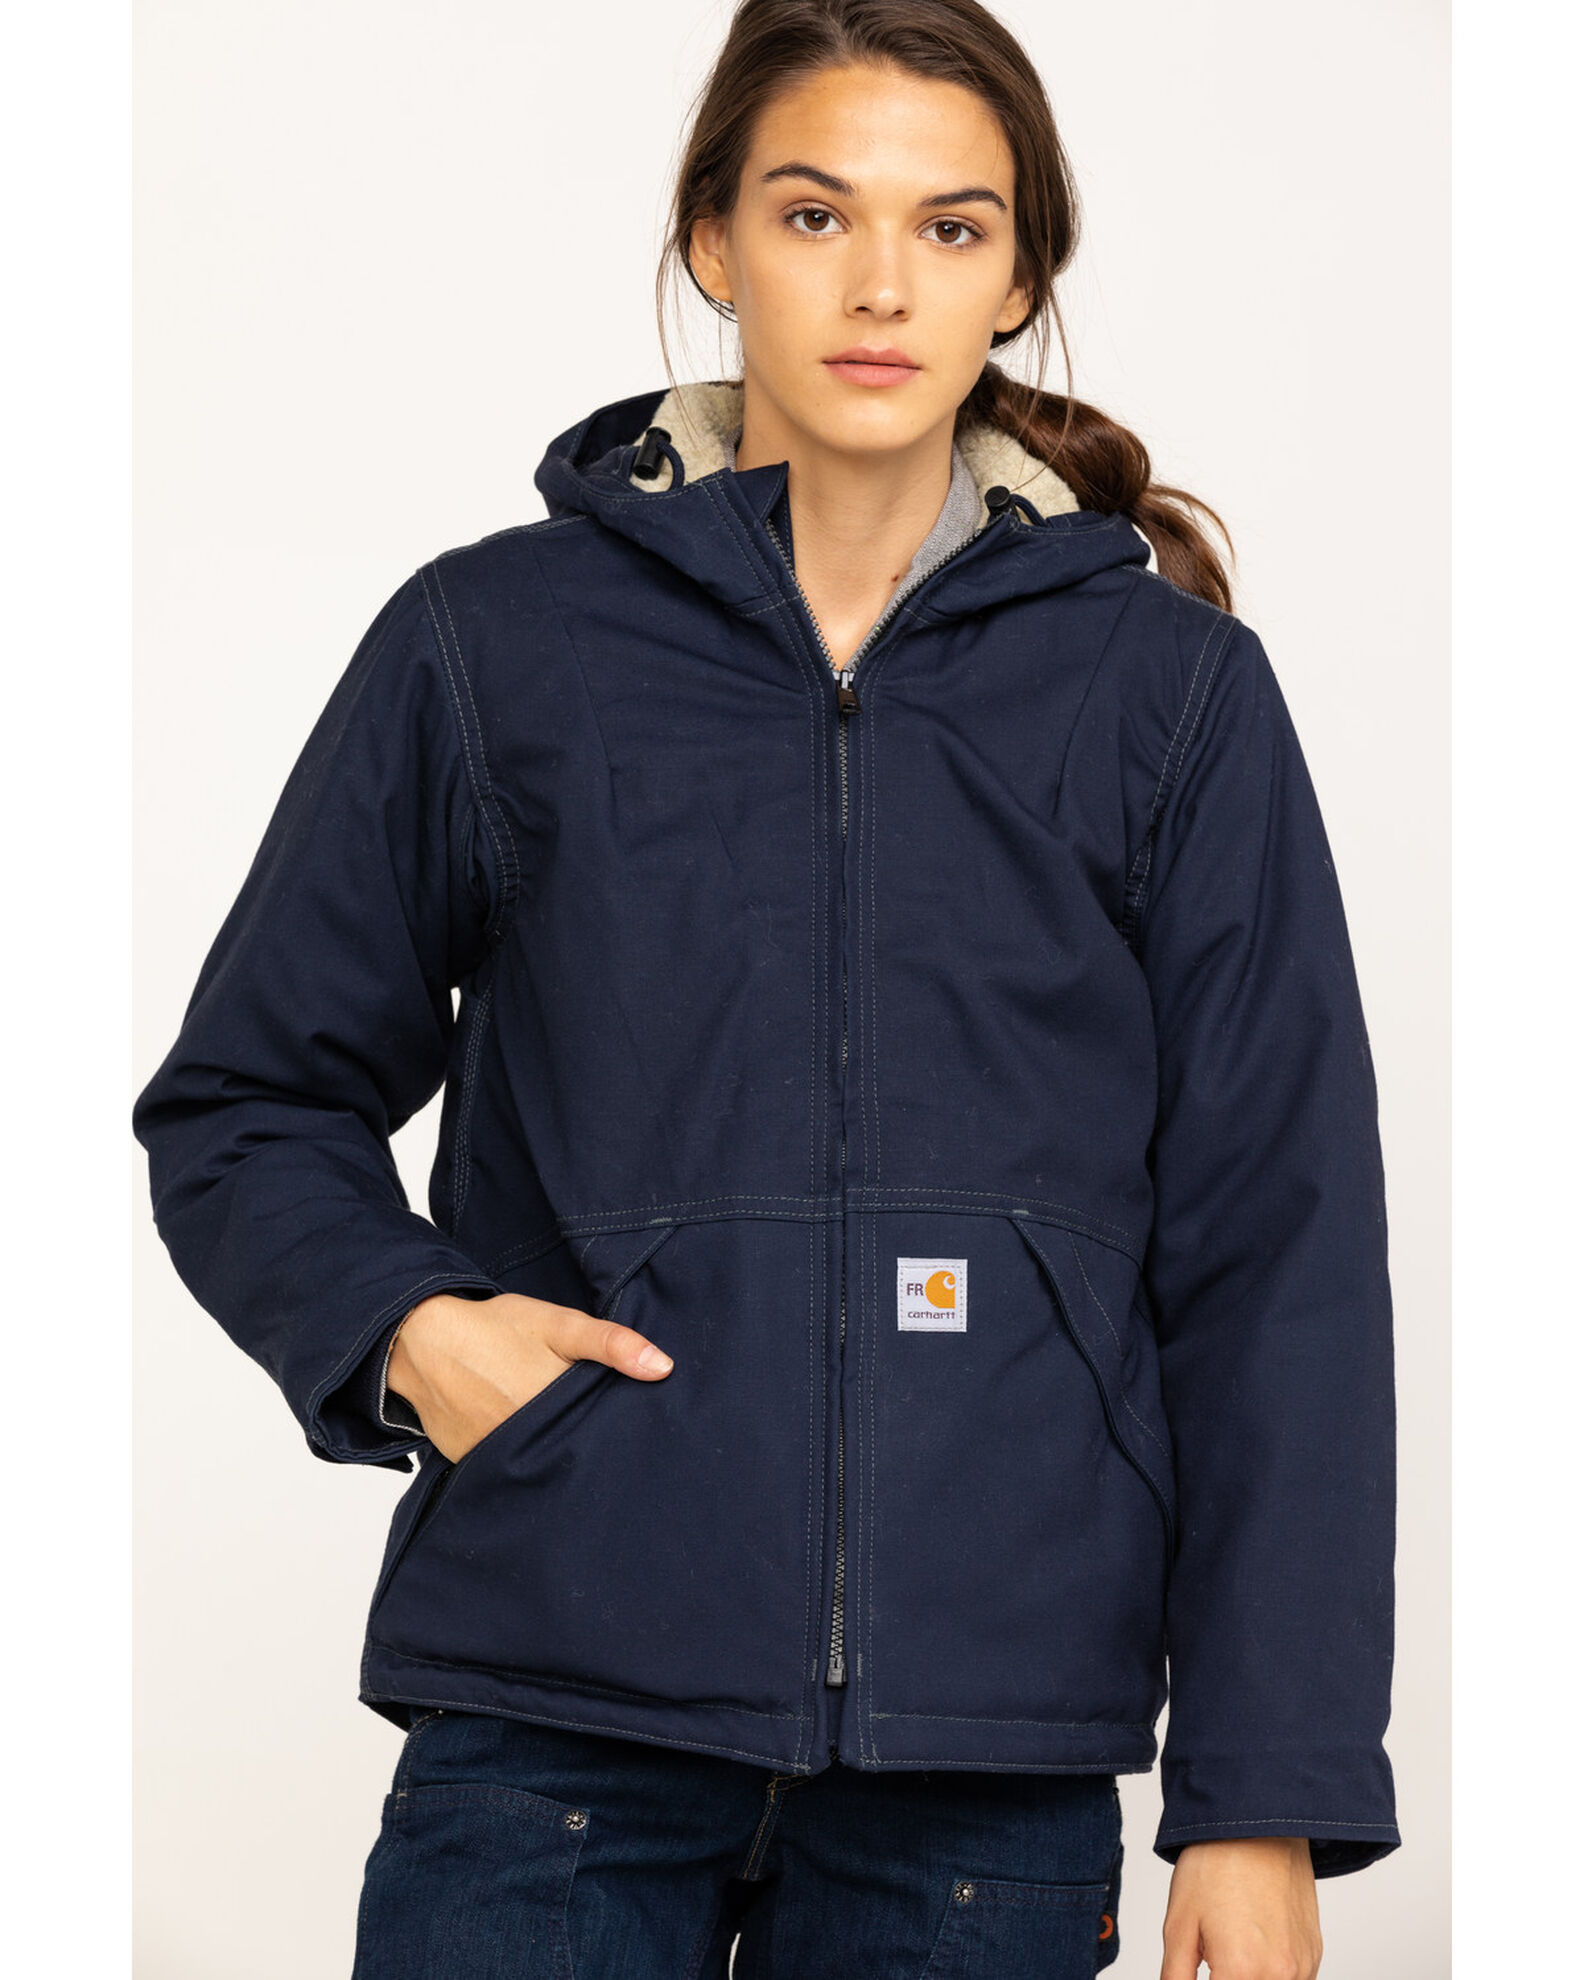 Product Name: Carhartt Women's FR Full Swing Quick Duck Sherpa-Lined FR  Jacket